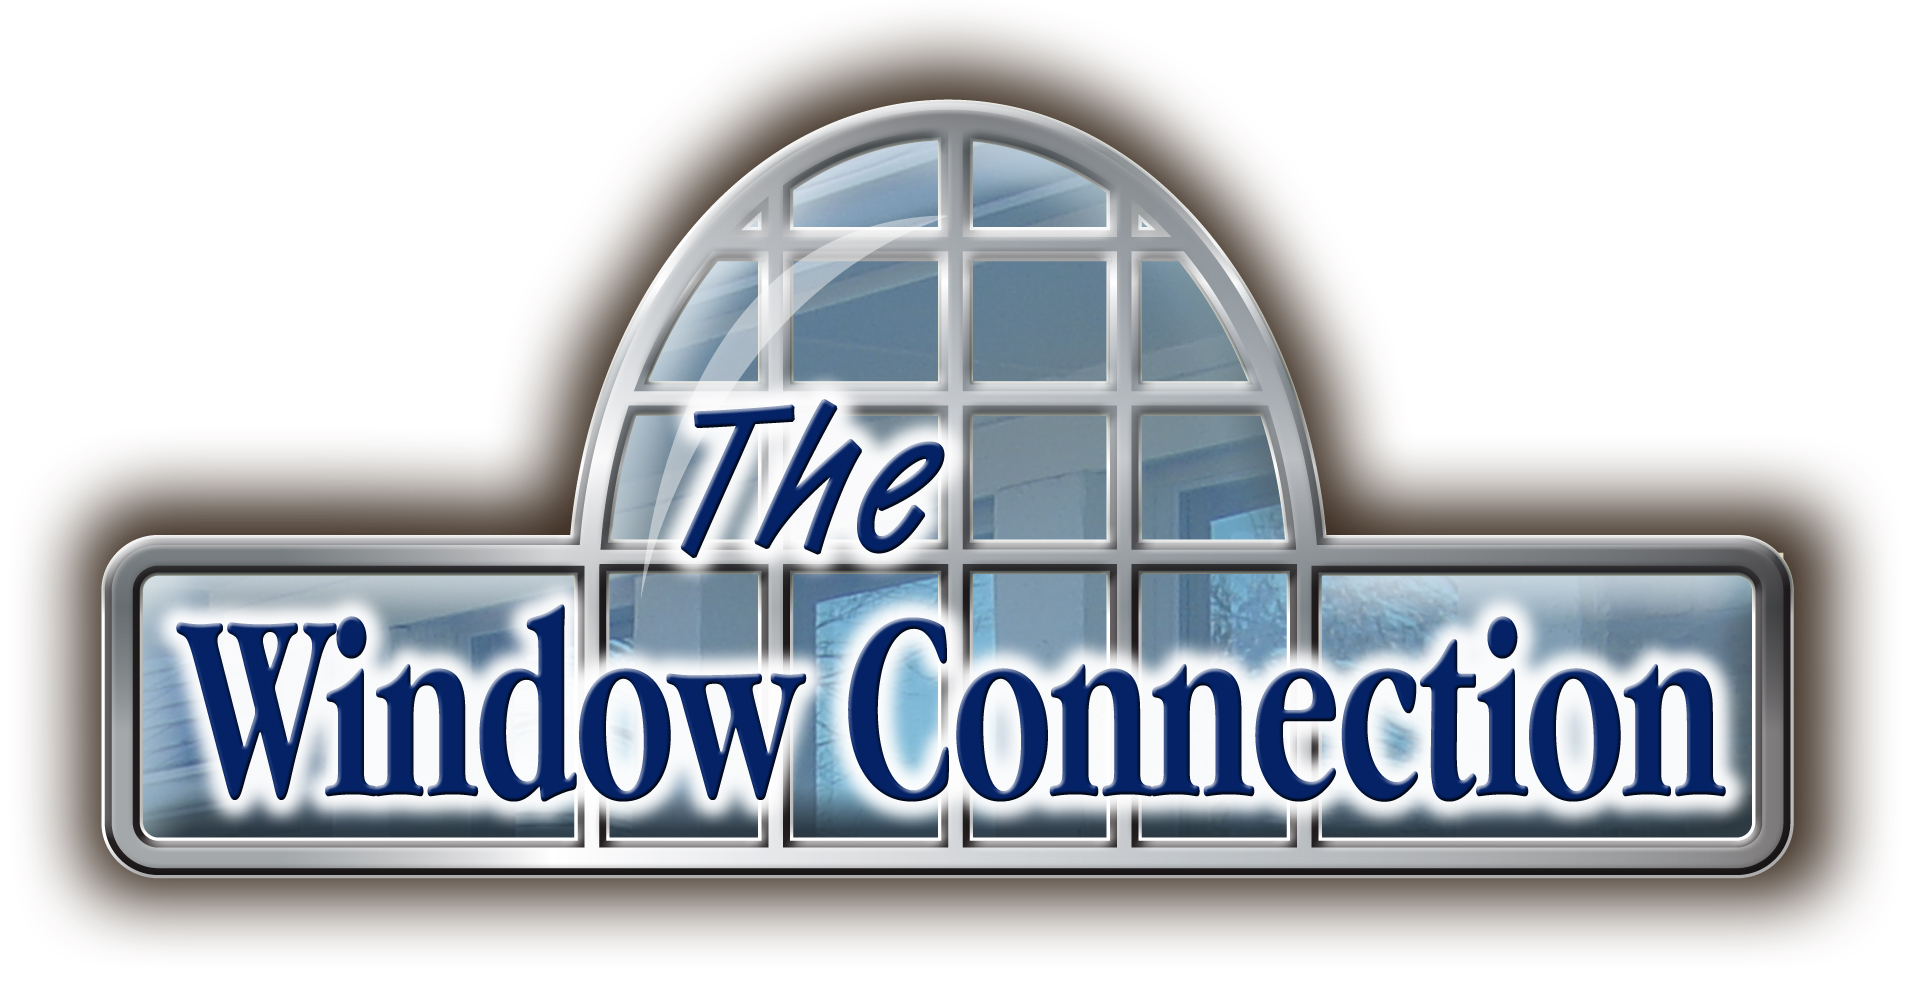 The Window Connection logo